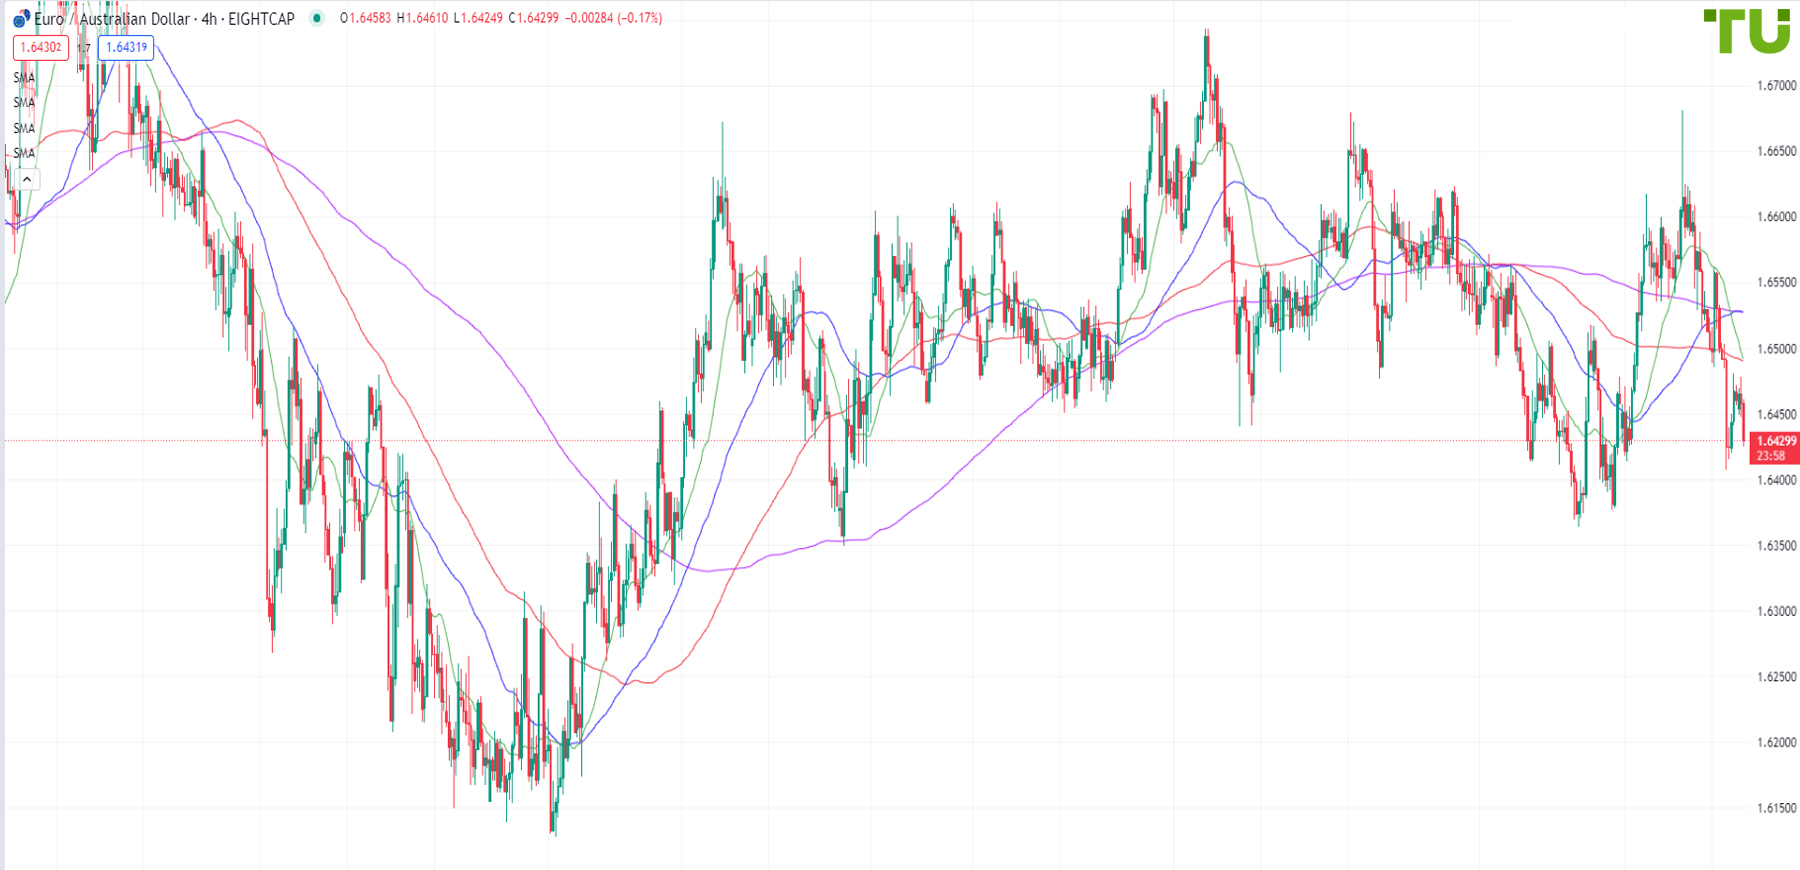 EUR/AUD continues to sell on rallies